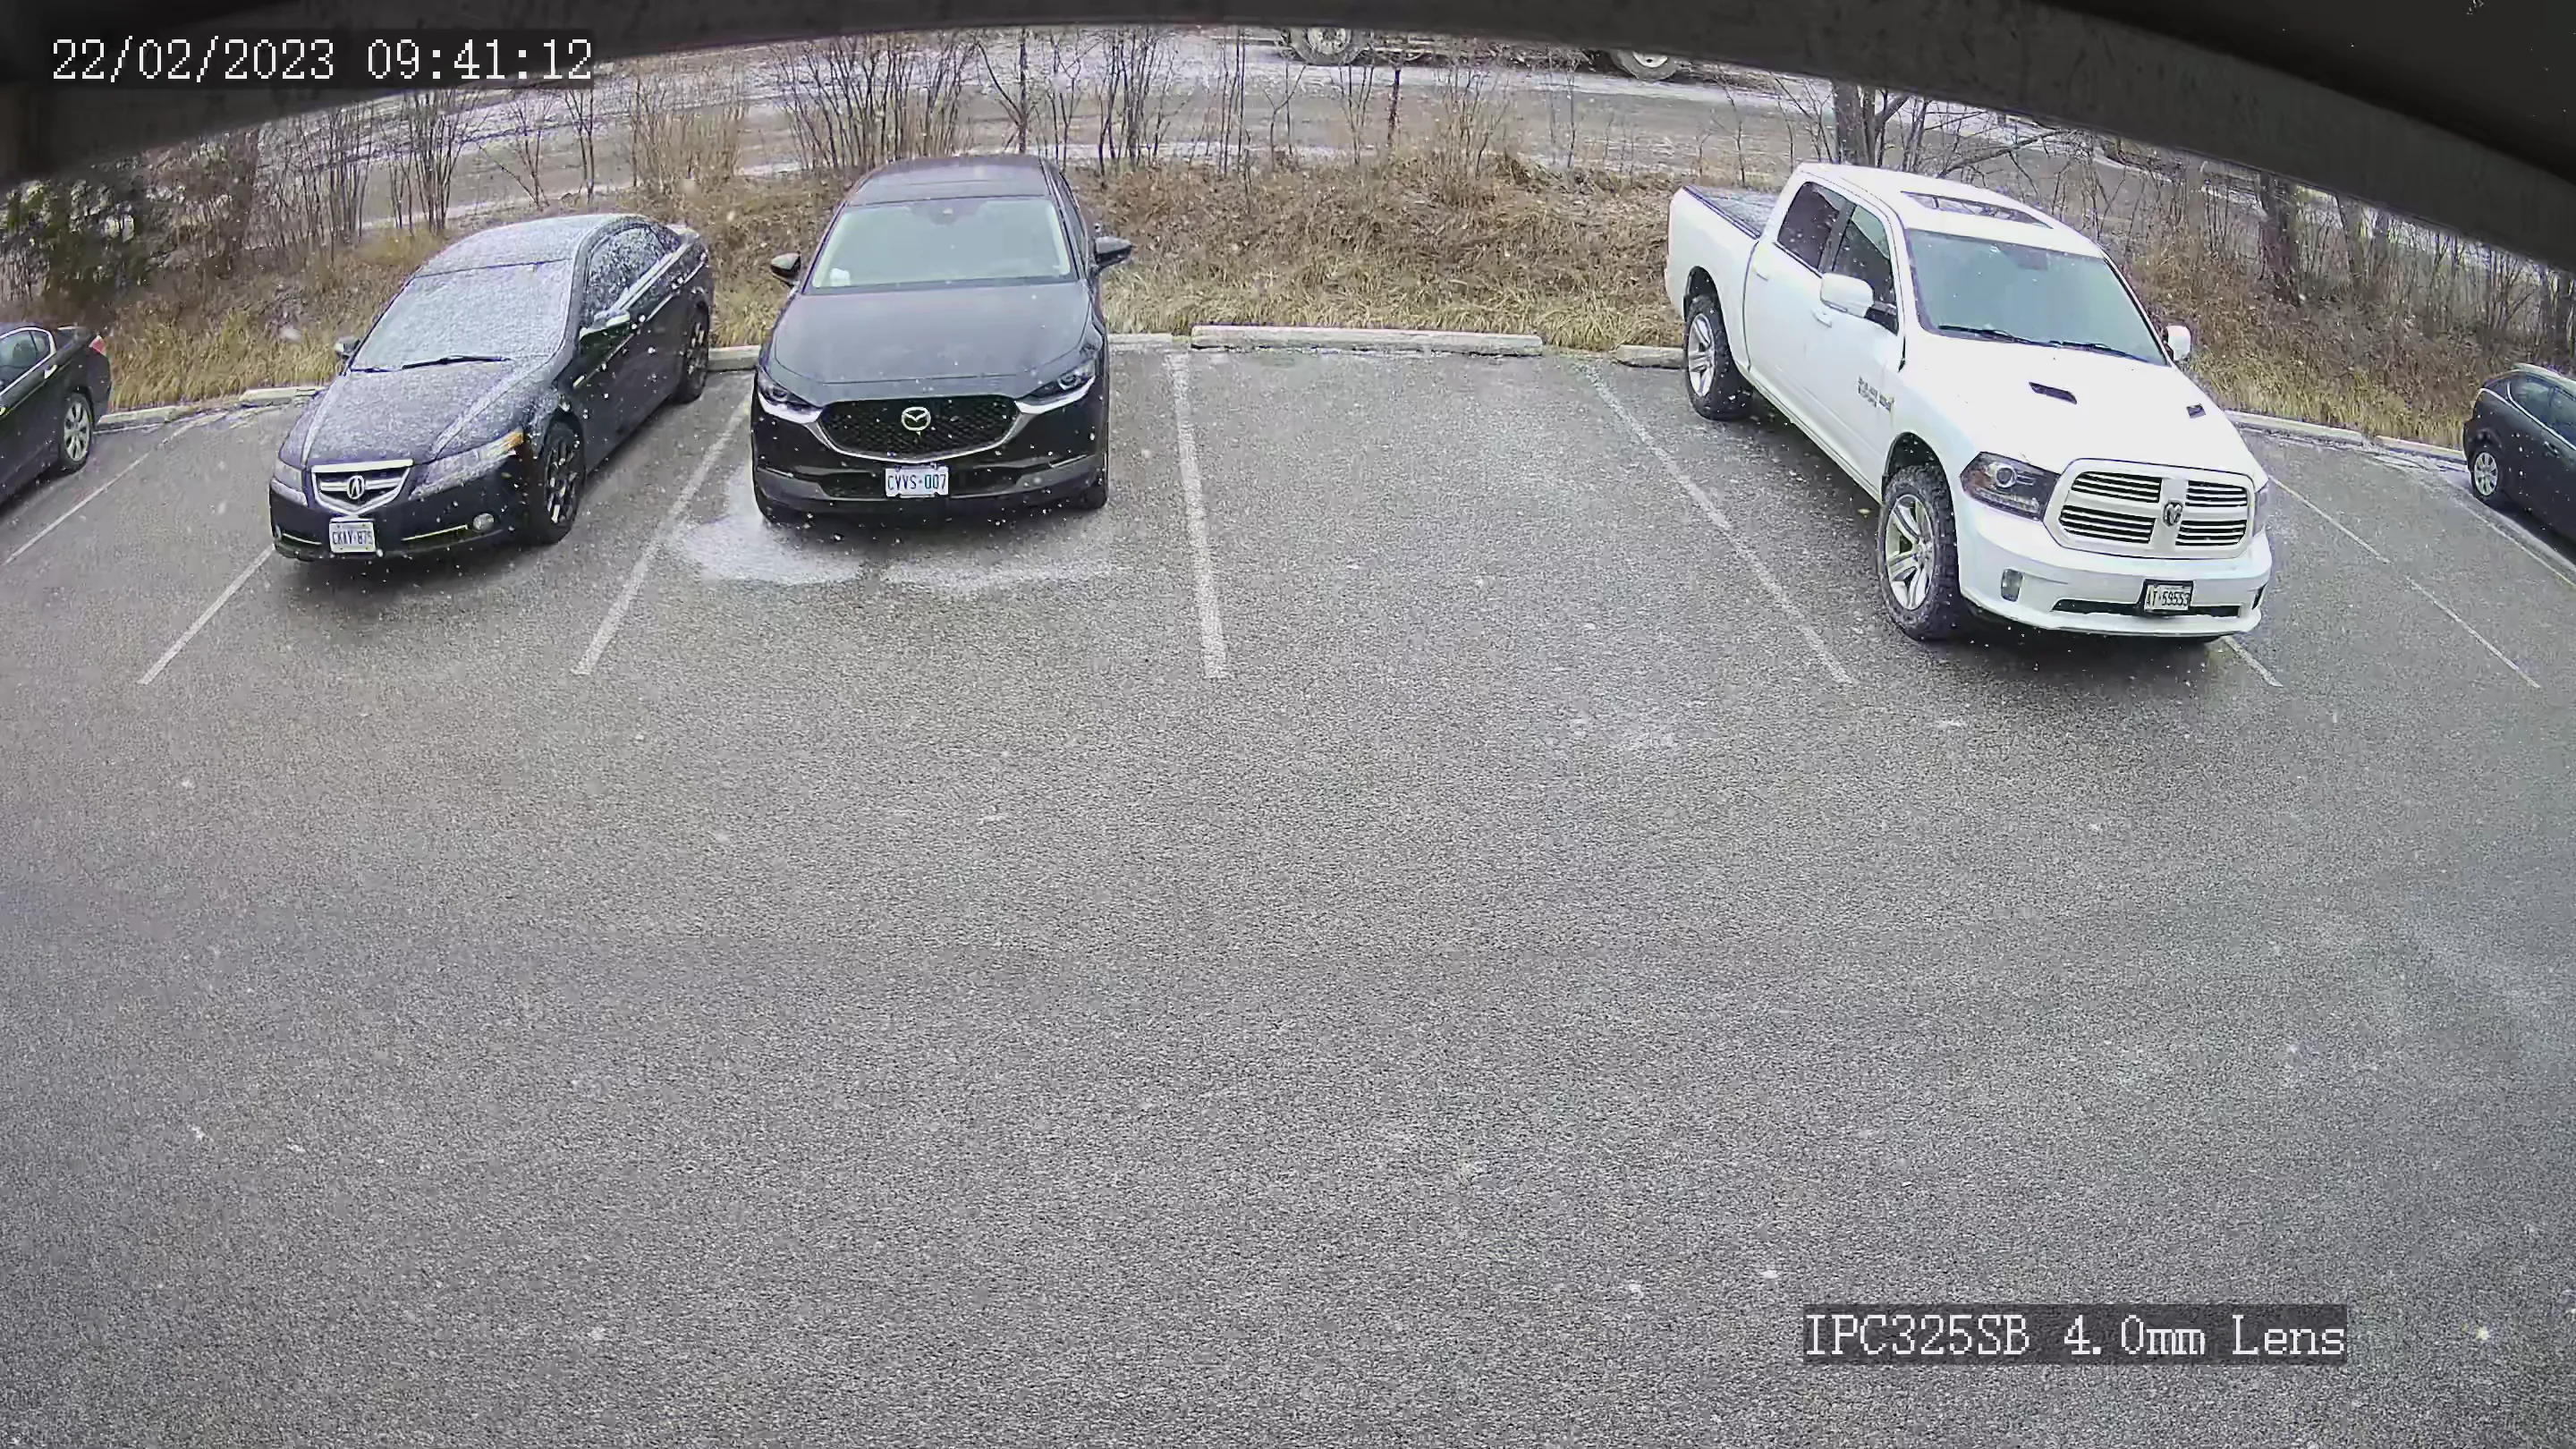 5MP dome security camera snapshot of a parking lot with a 4.0mm lens